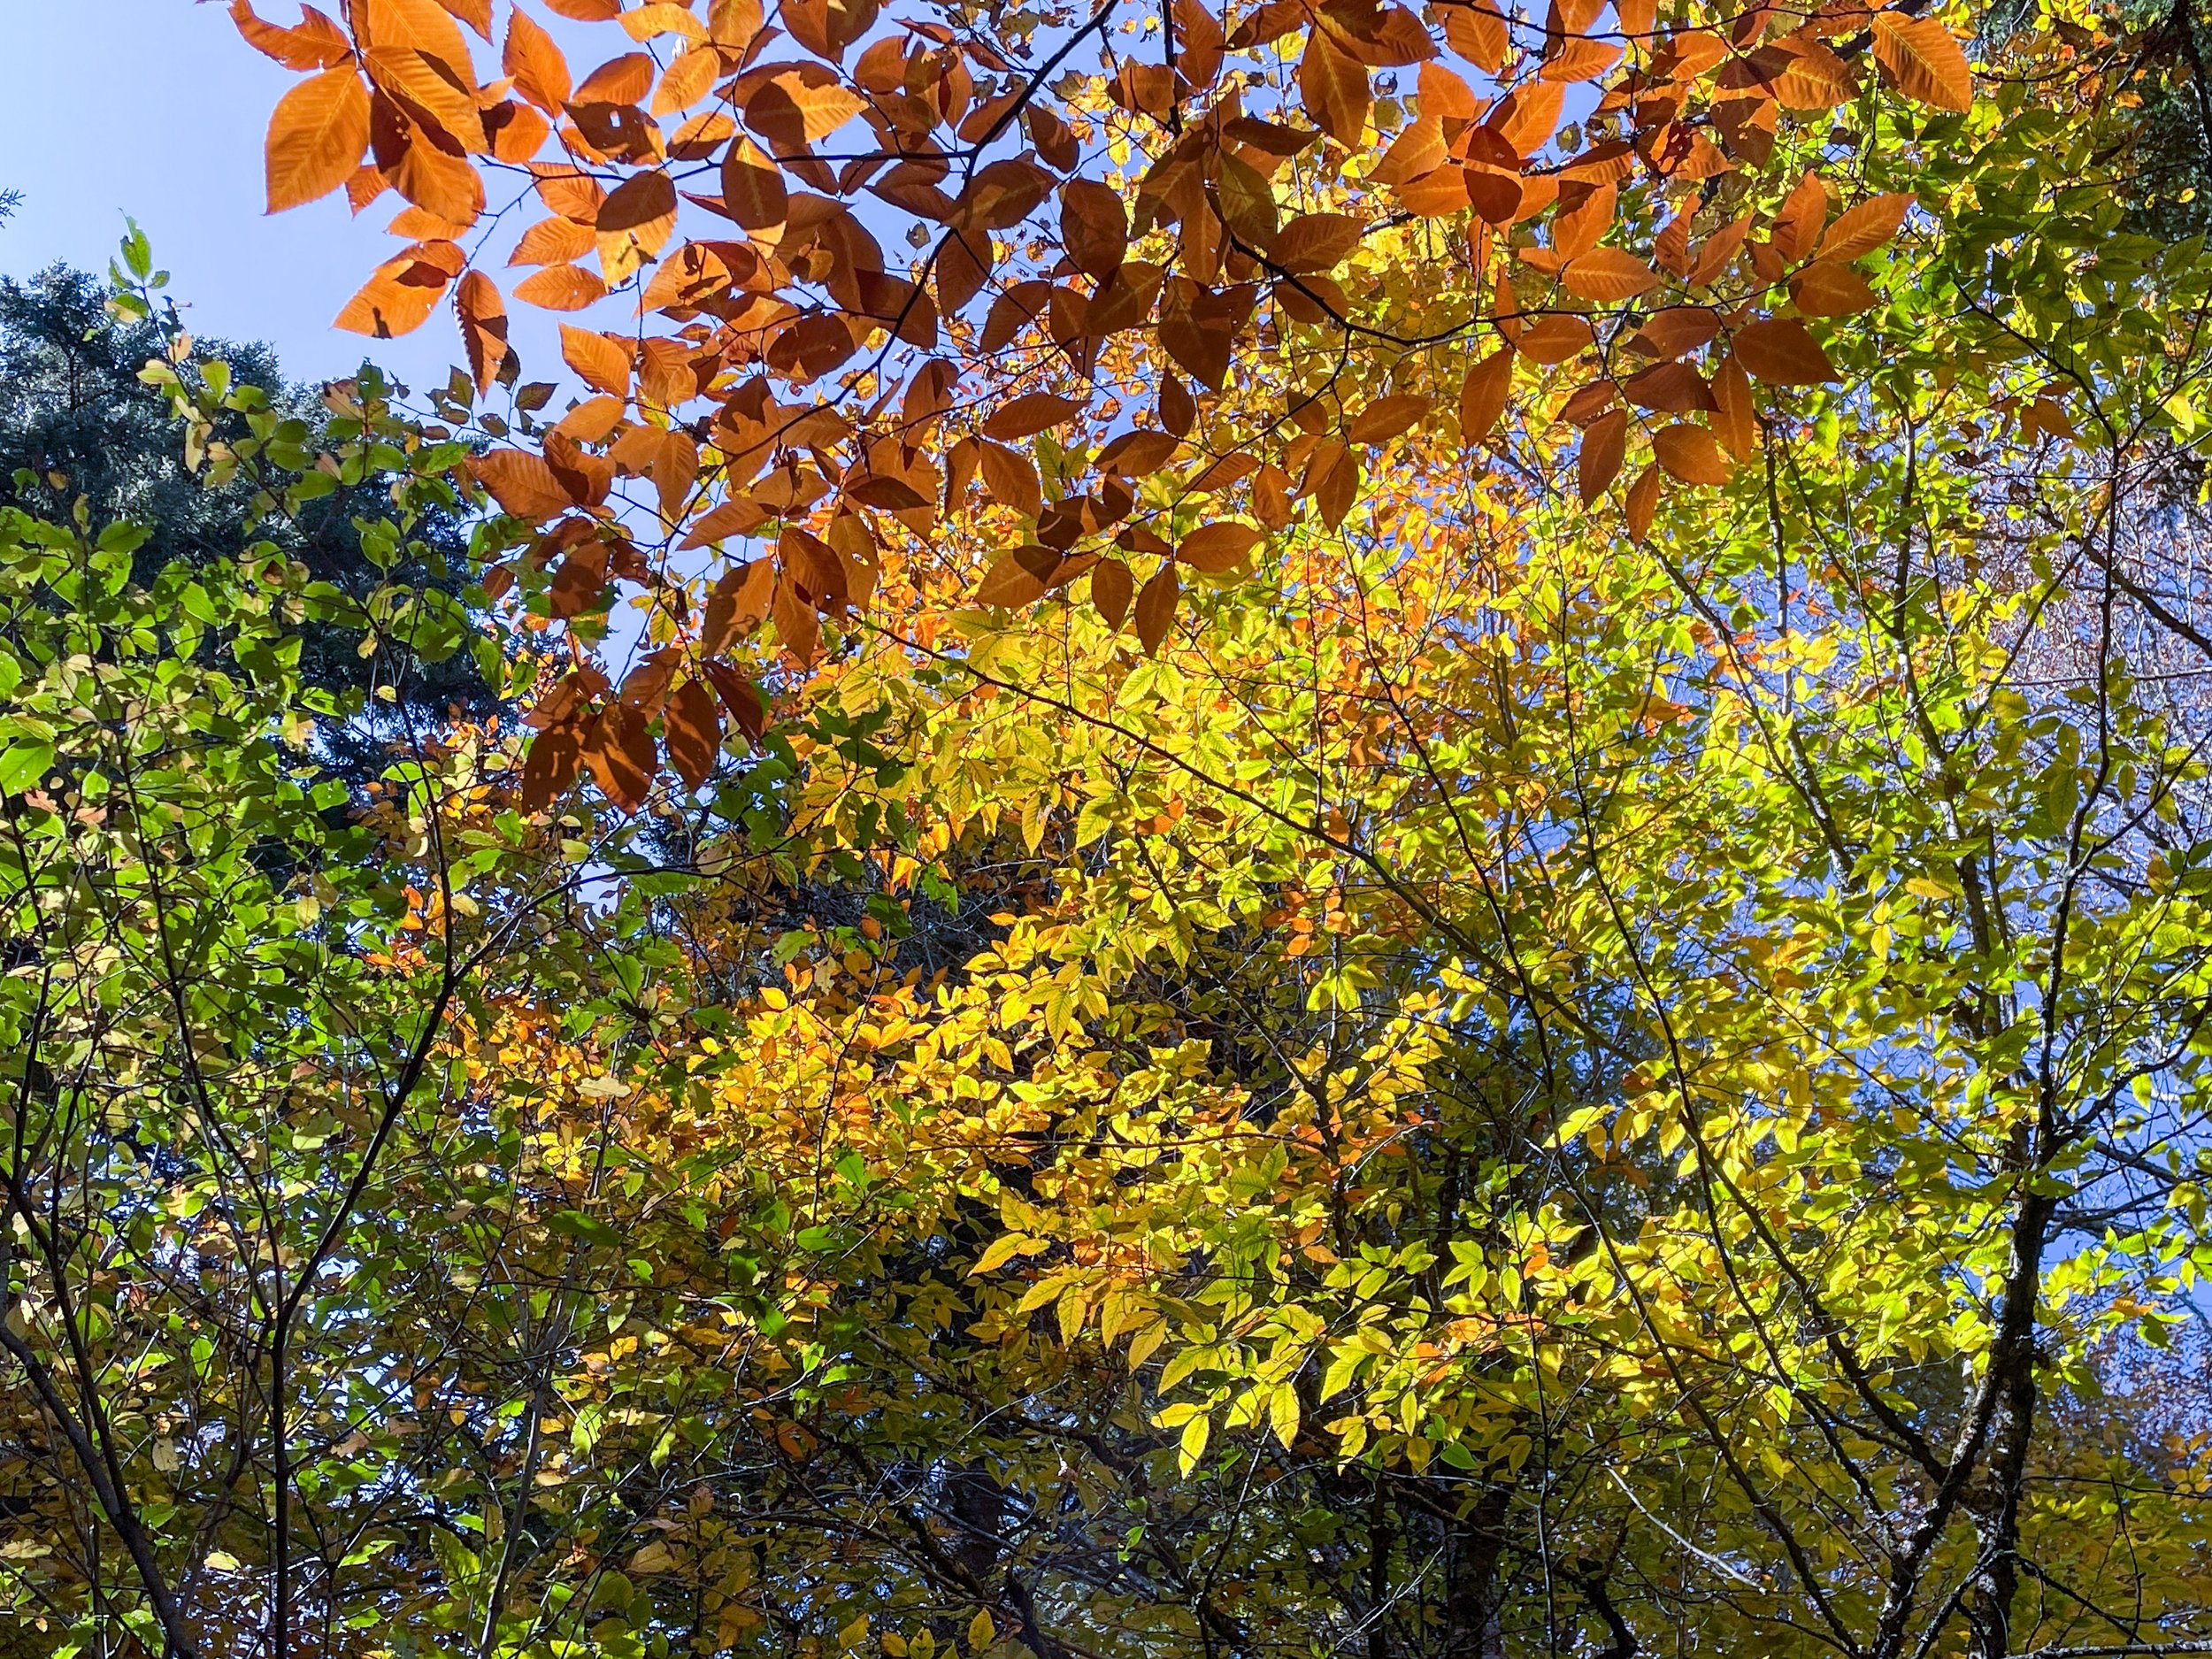  As the summer growing season draws to a close, green pigments deteriorate within the yellow maple, sugar maple, sweetgum, and hickory trees, providing a colorful seasonal display for hiking enthusiasts. Image credit: Jeffrey Rose, edits by Rachel Le